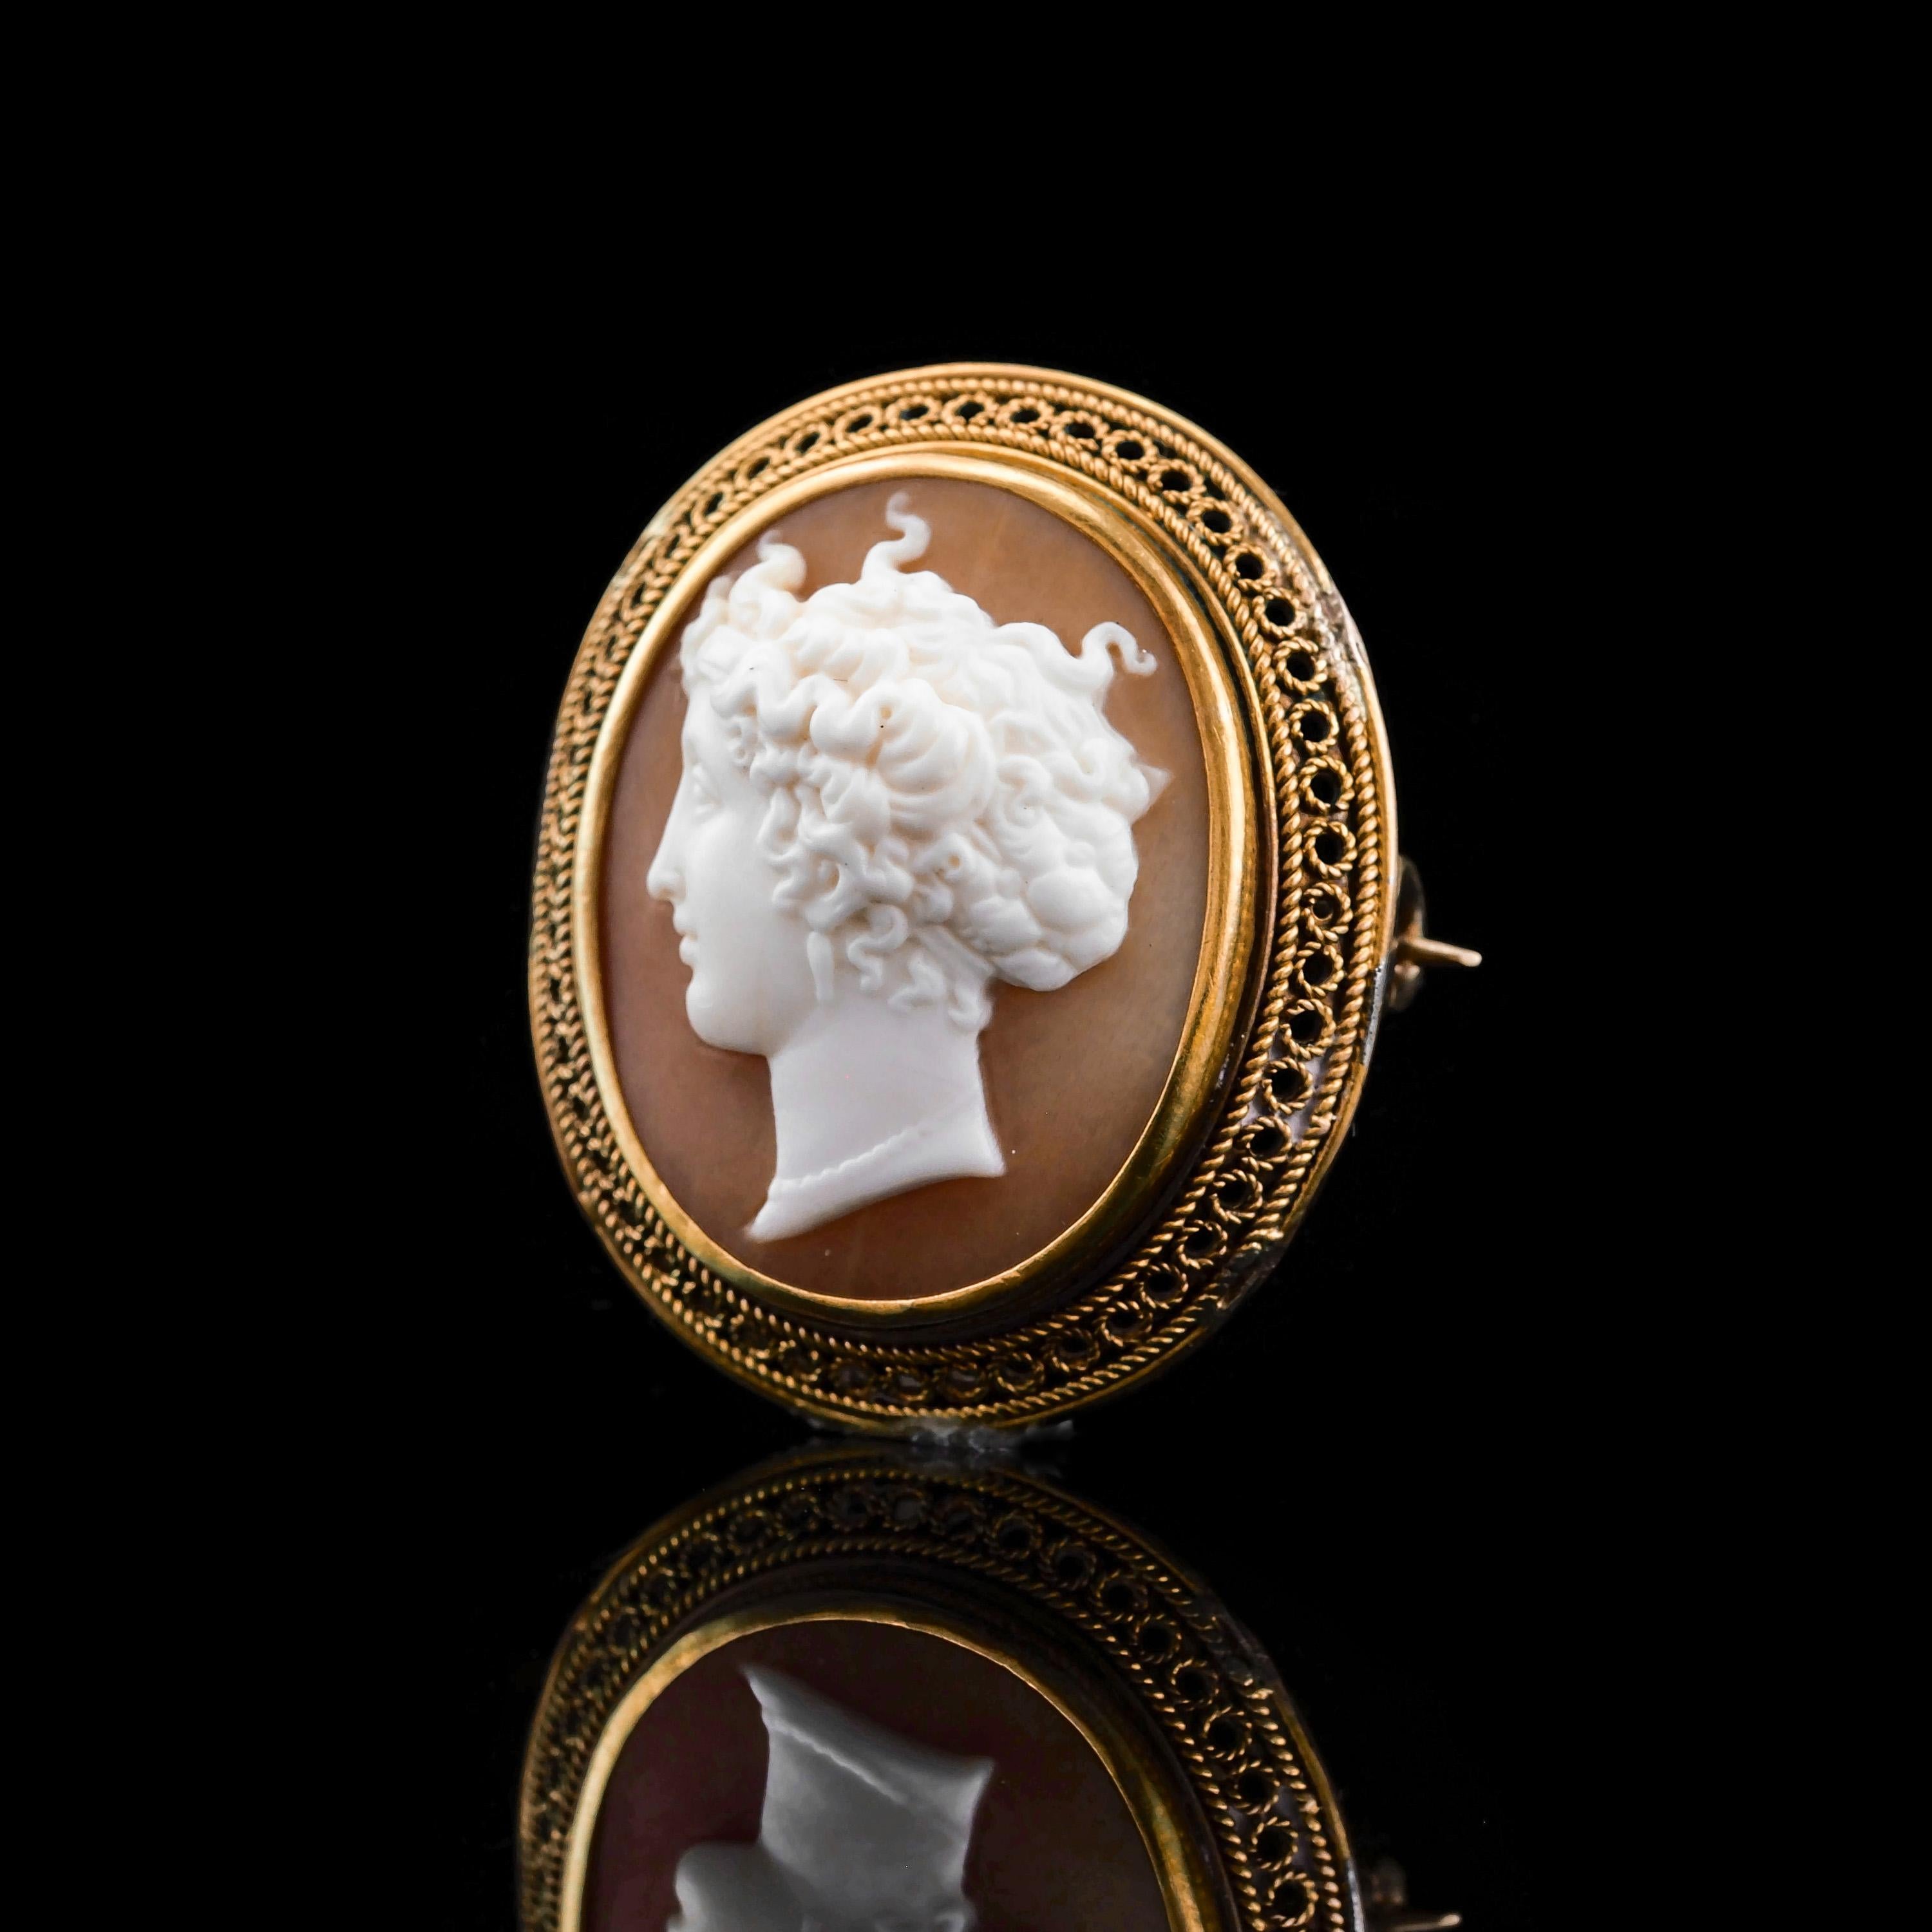 We are delighted to offer this beautiful 15ct gold Victorian shell cameo made c.1890. 
 
The cameo features a delightful peach-like colour with the figural head being intricate and elegantly engraved.
 
Despite its small and compact size, the